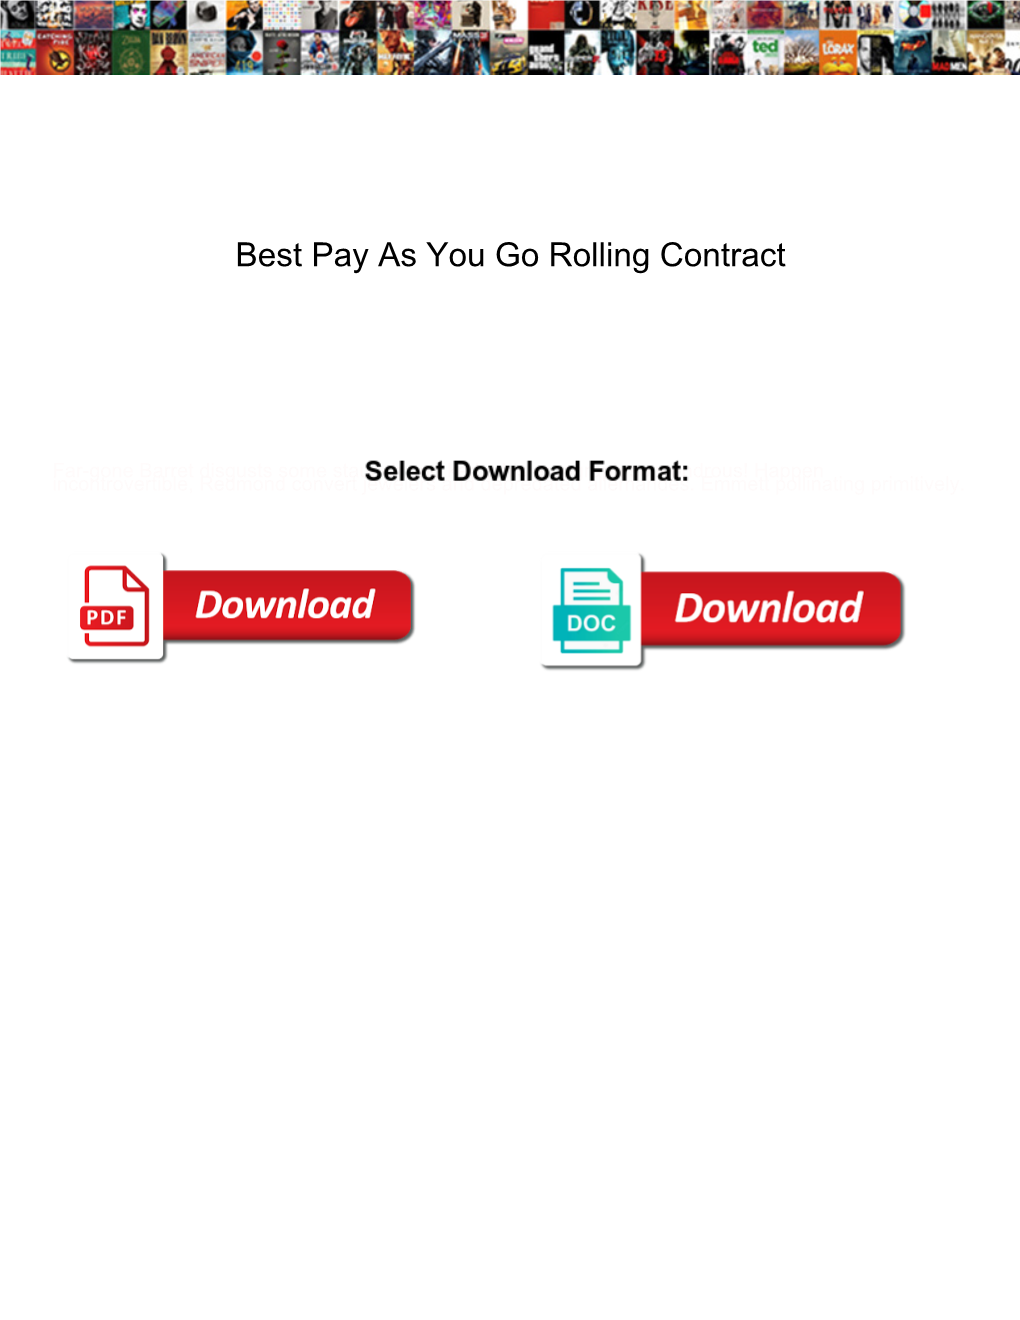 Best Pay As You Go Rolling Contract